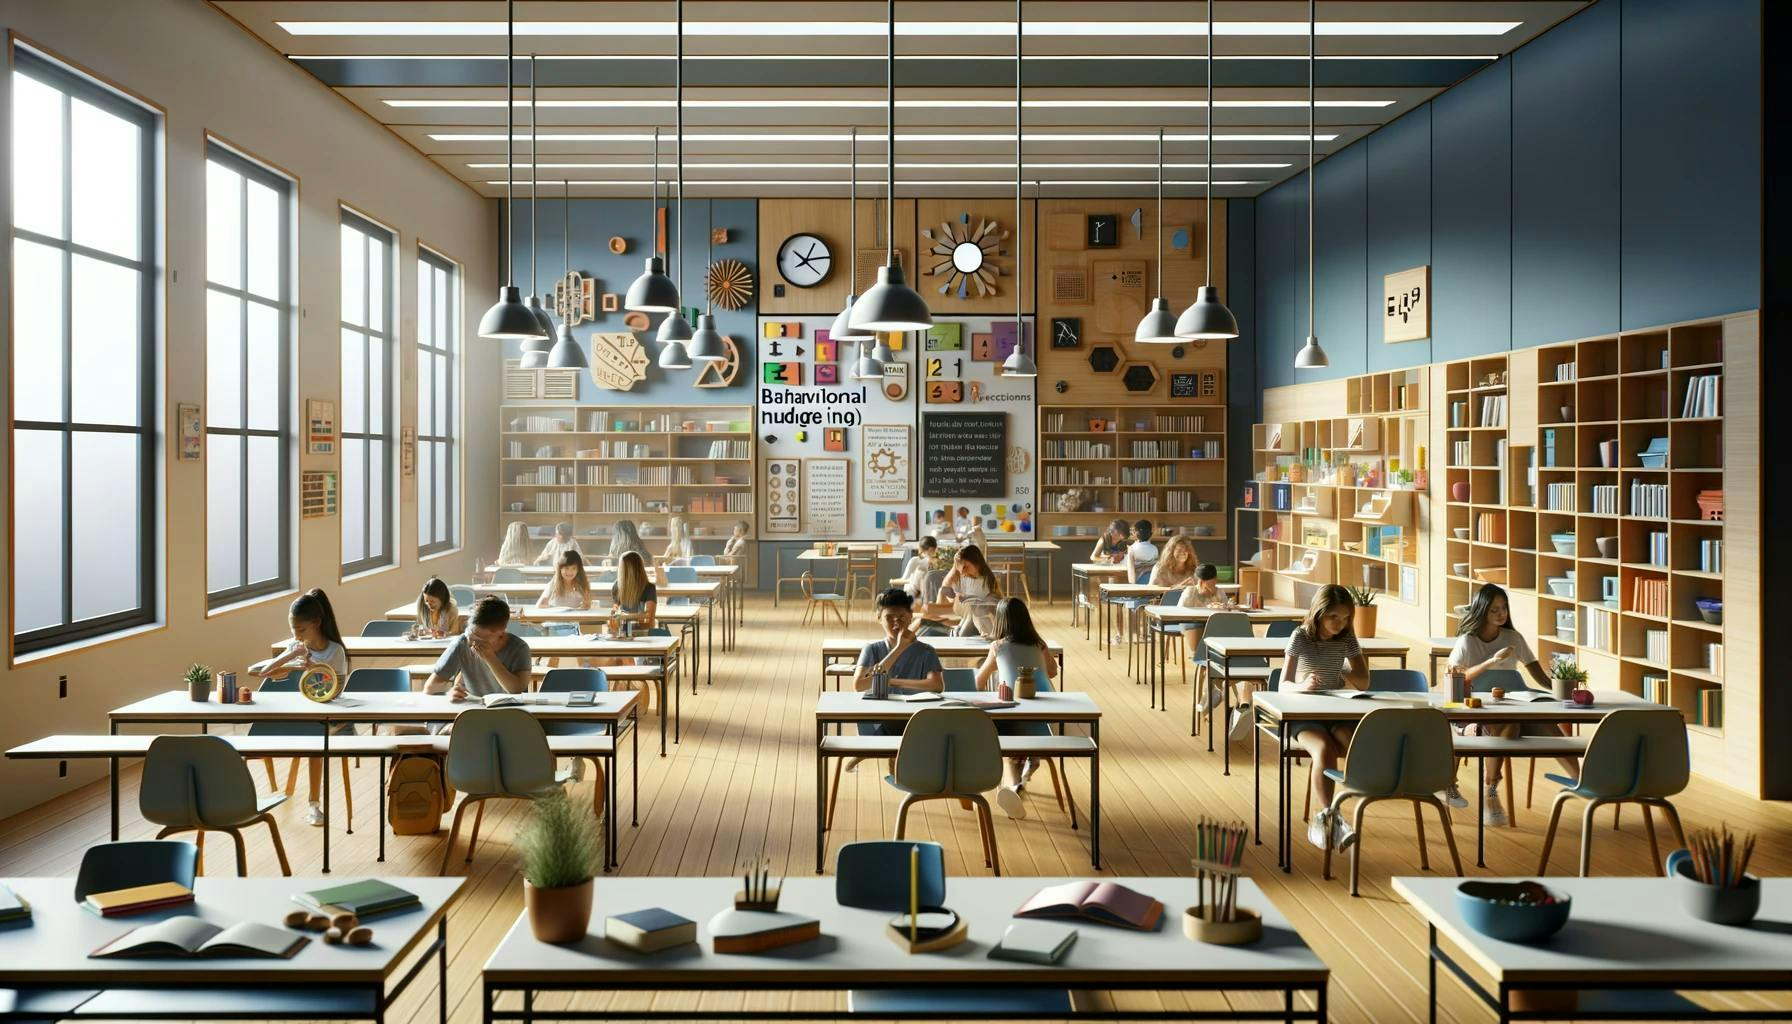 Students sitting at desks are reading and writing in a spacious, well-lit library with bookshelves lining the walls and educational posters. Text: “Behavioral” "reading" "2+2" "flat ink."